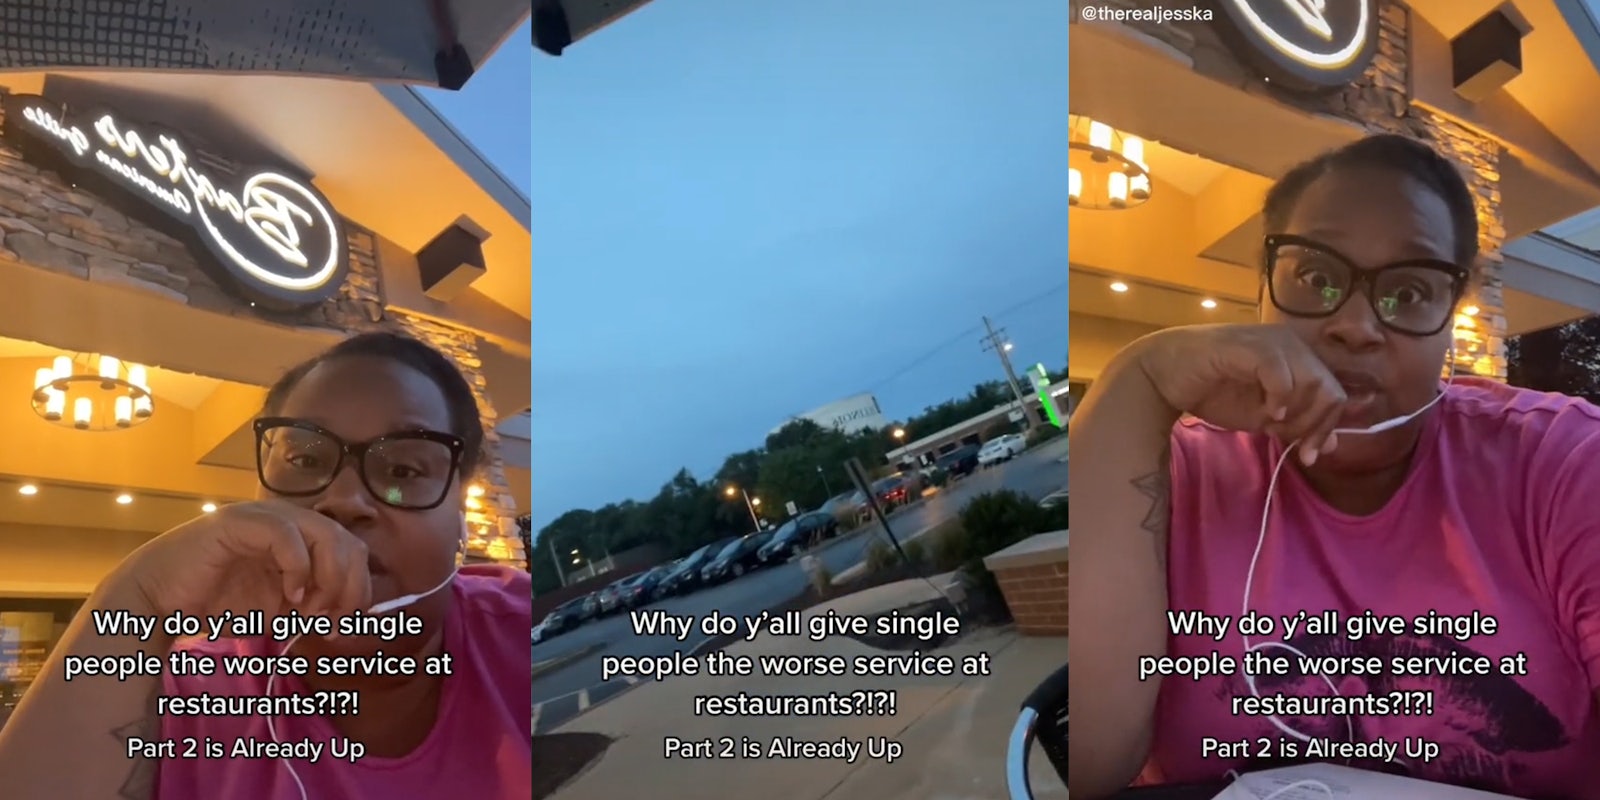 woman outside restaurant with caption 'Why do y'all give single people the worse service at restaurants?!?! Part 2 is Already Up'